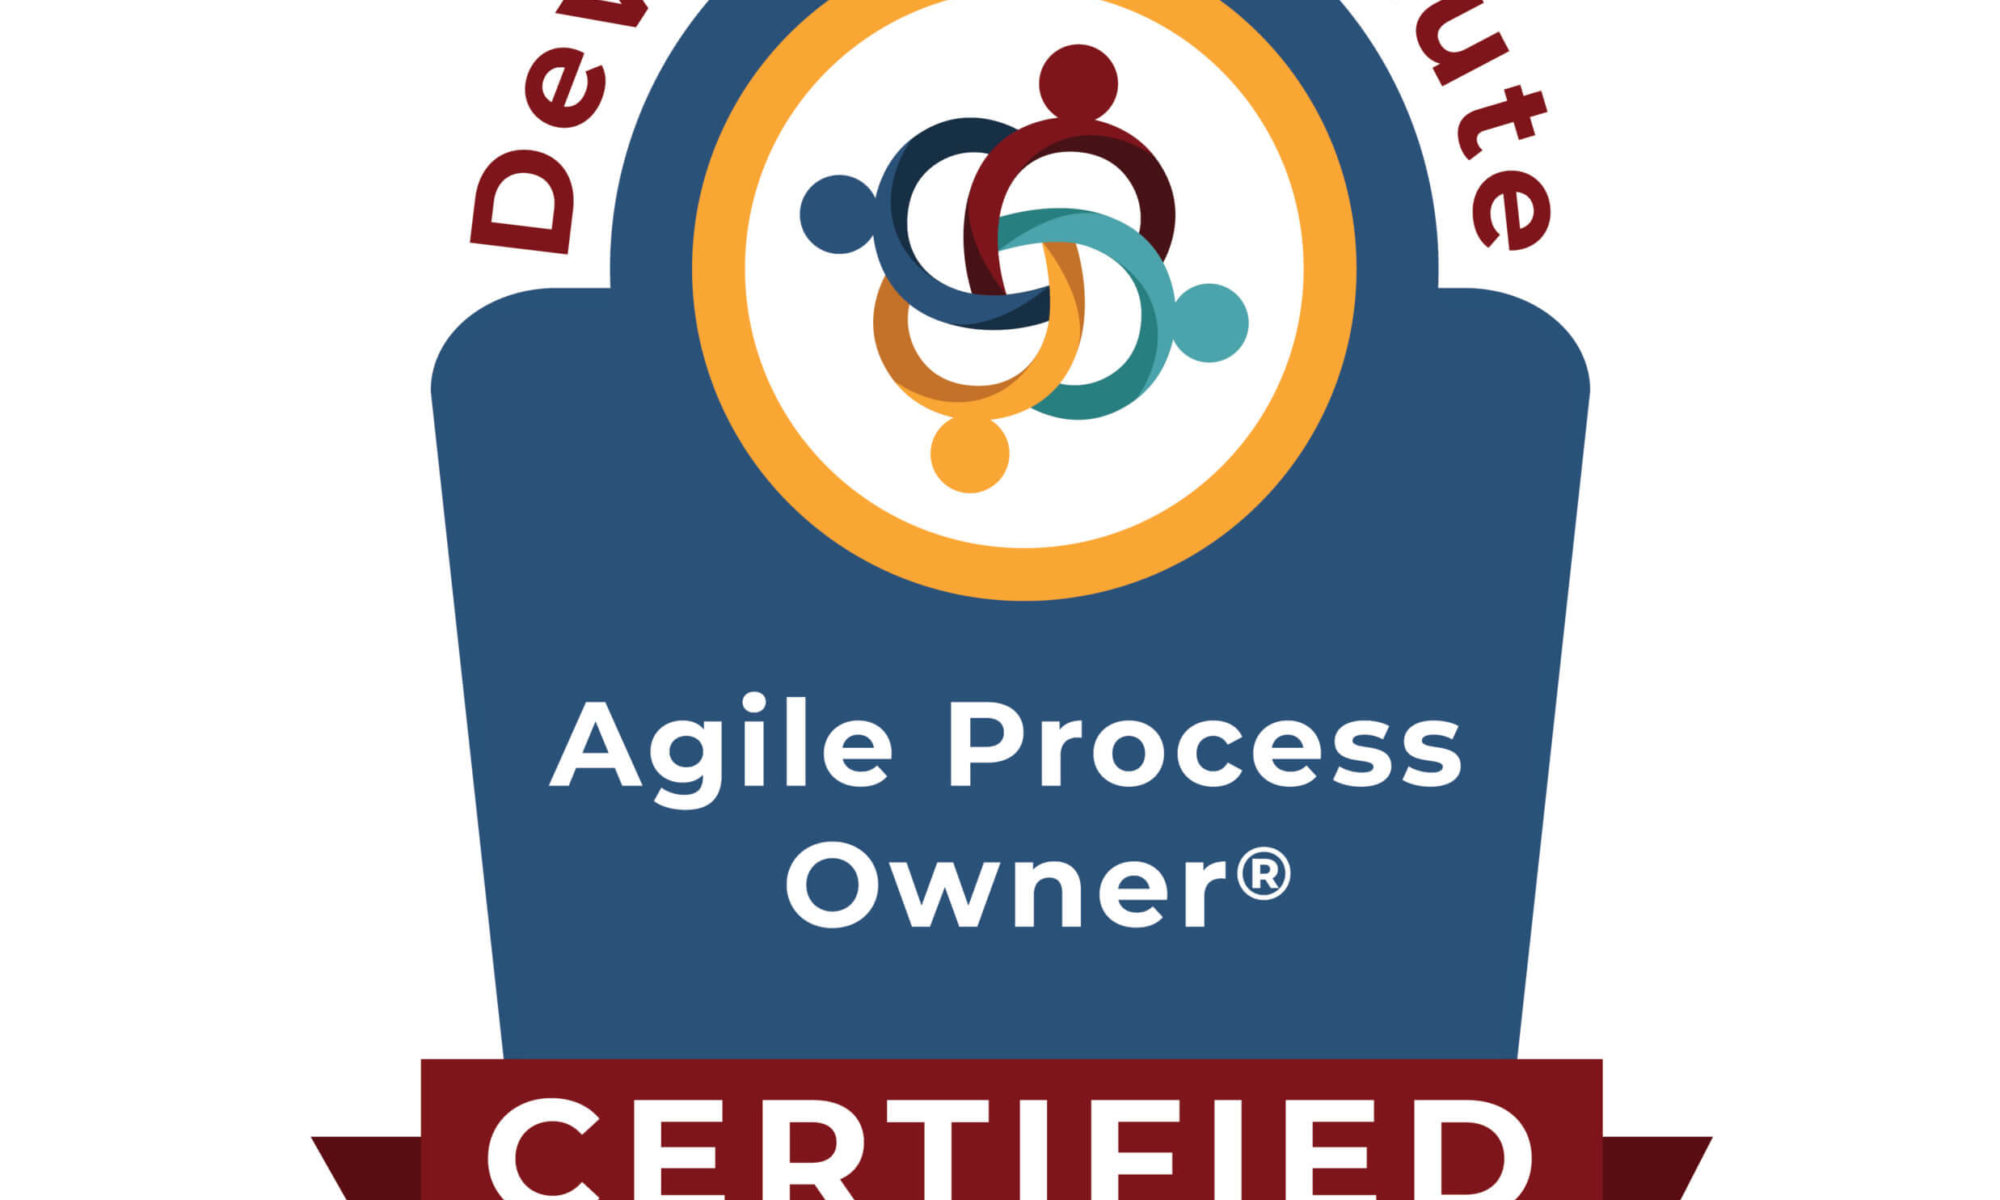 Agile Process Owner